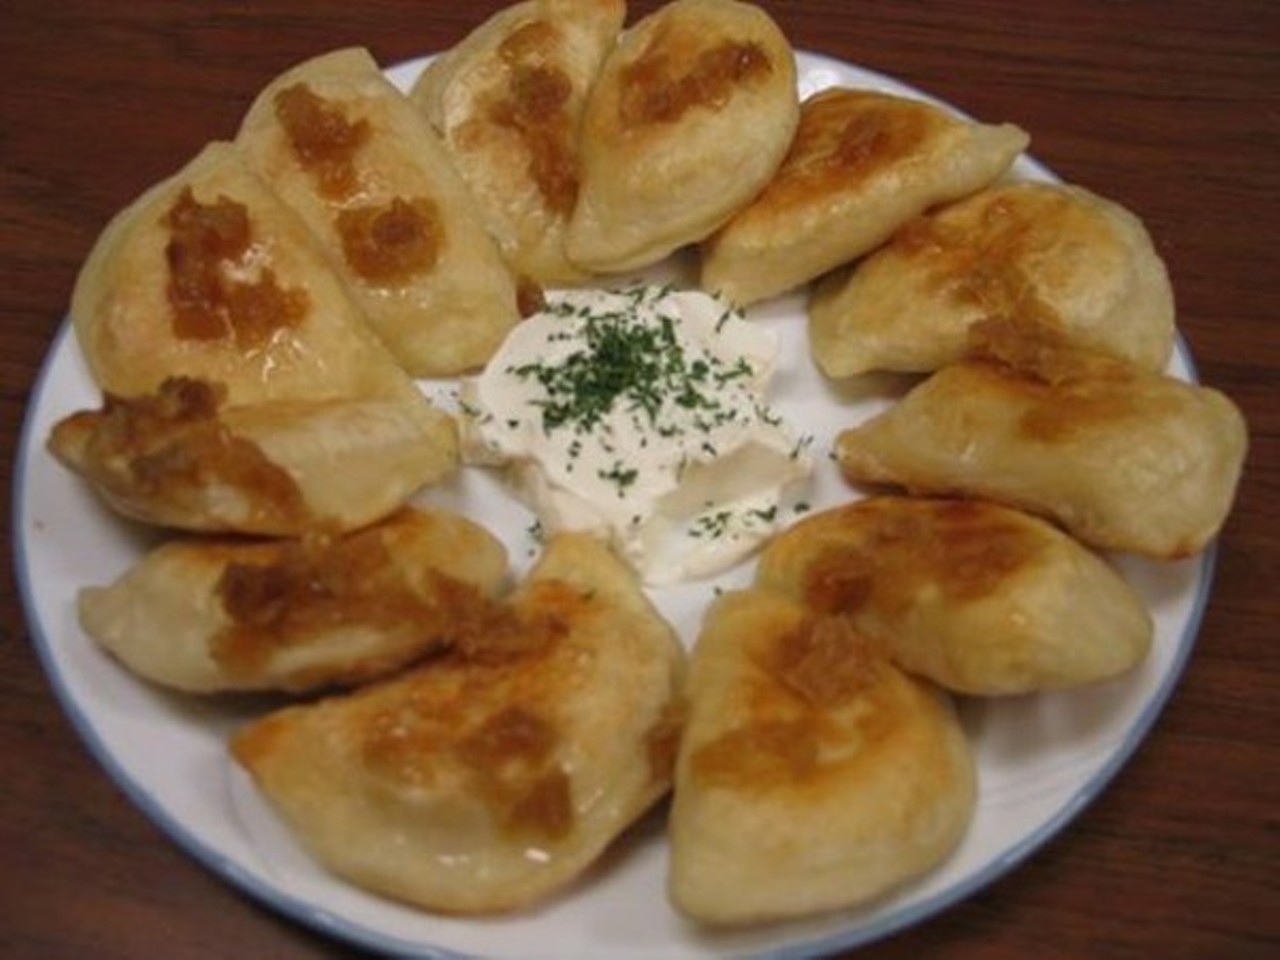 Perla Homemade Delights - 5380 State Rd., Parma
This coveted eastern European pierogi recipe at Perla's is the main reason this is the go-to place for folks looking to stock up for a special event or party. Try the potato and cottage cheese variety. (Photo via Perla)